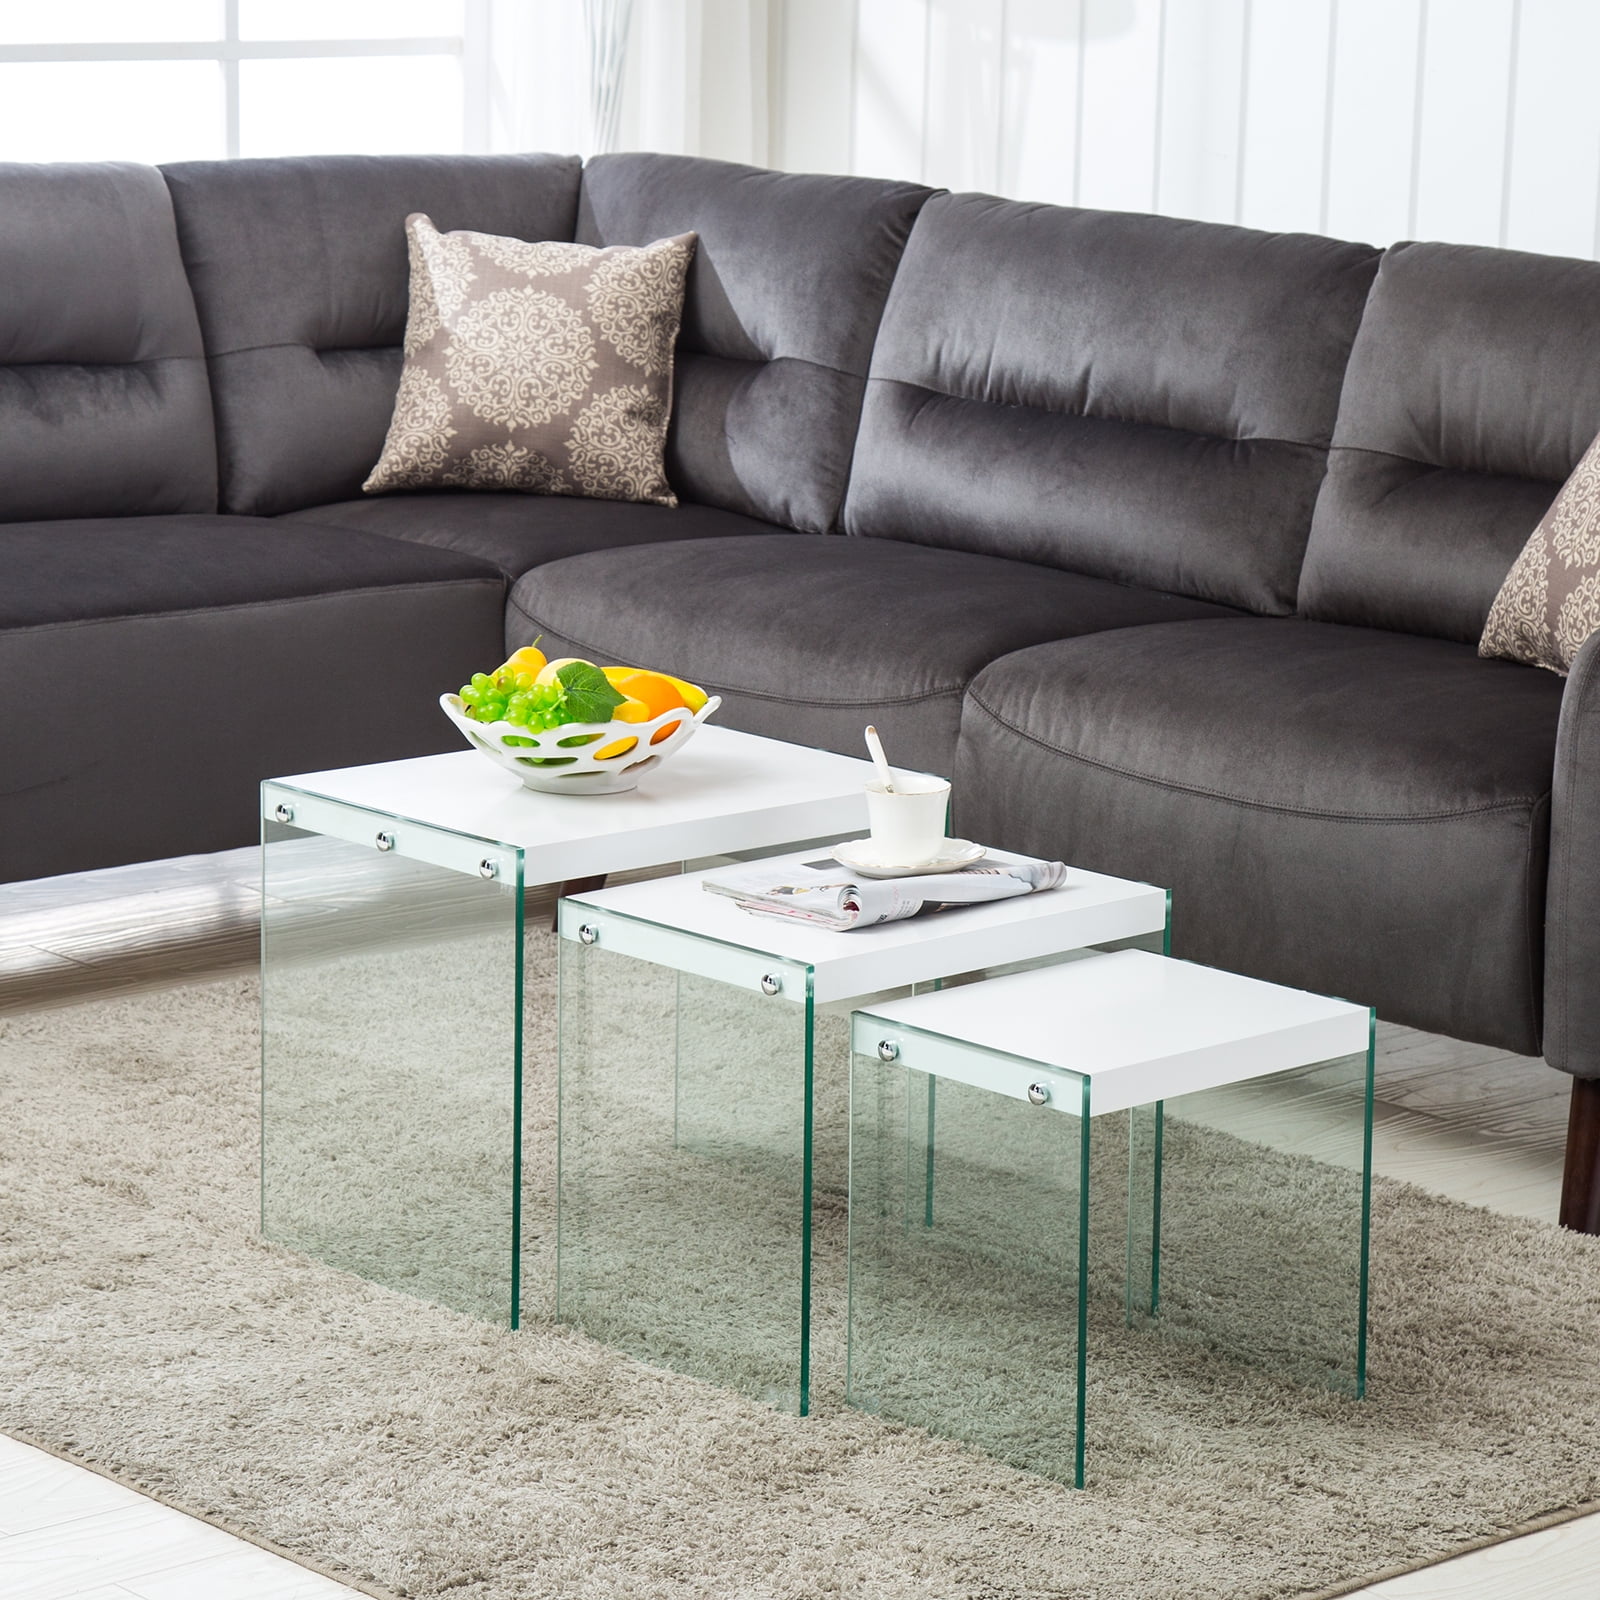 New Modern Nest of 3 White Coffee Table Side /End Table Living Room ...